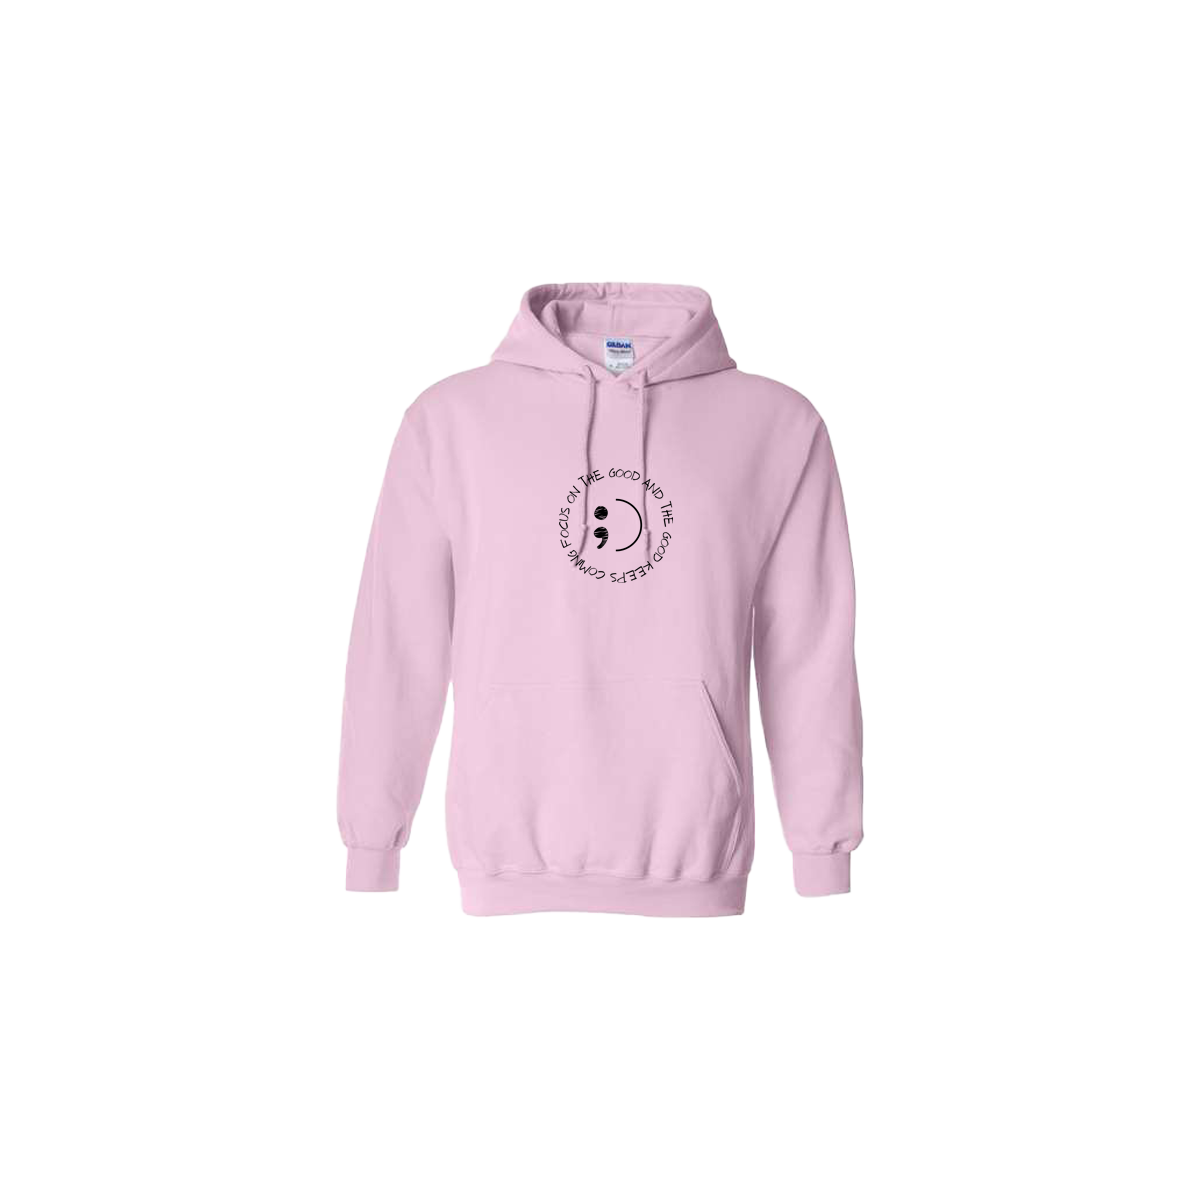 Focus on The Good And The Good Keeps Coming Embroidered Light Pink Hoodie - Mental Health Awareness Clothing